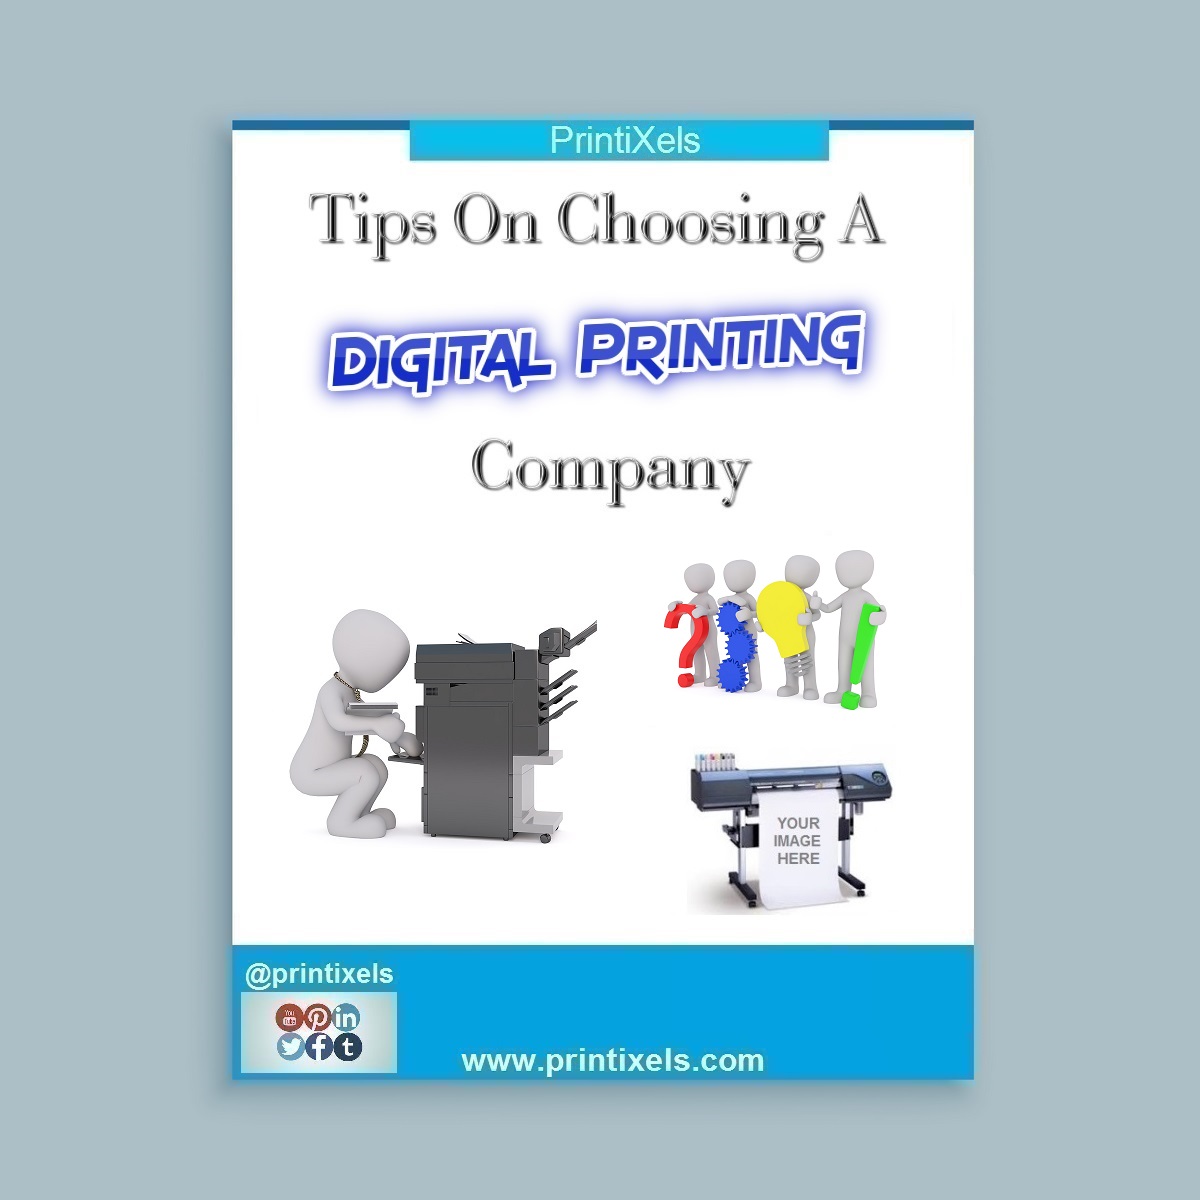 Tips On Choosing A Digital Printing Company in the Philippines